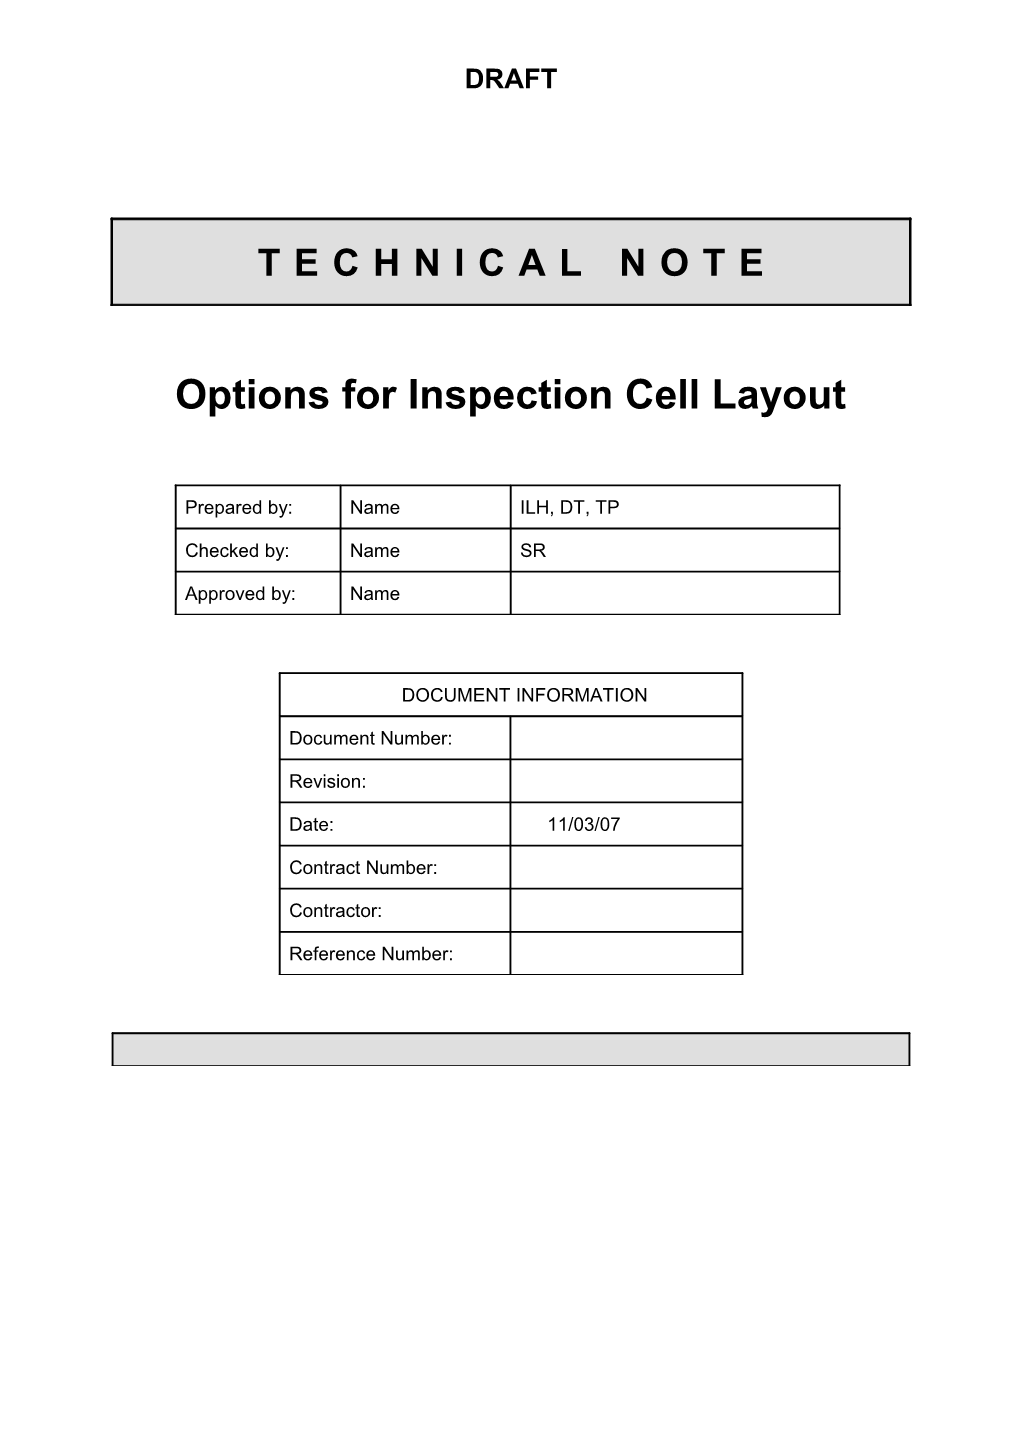 Options for Inspection Cell Layout